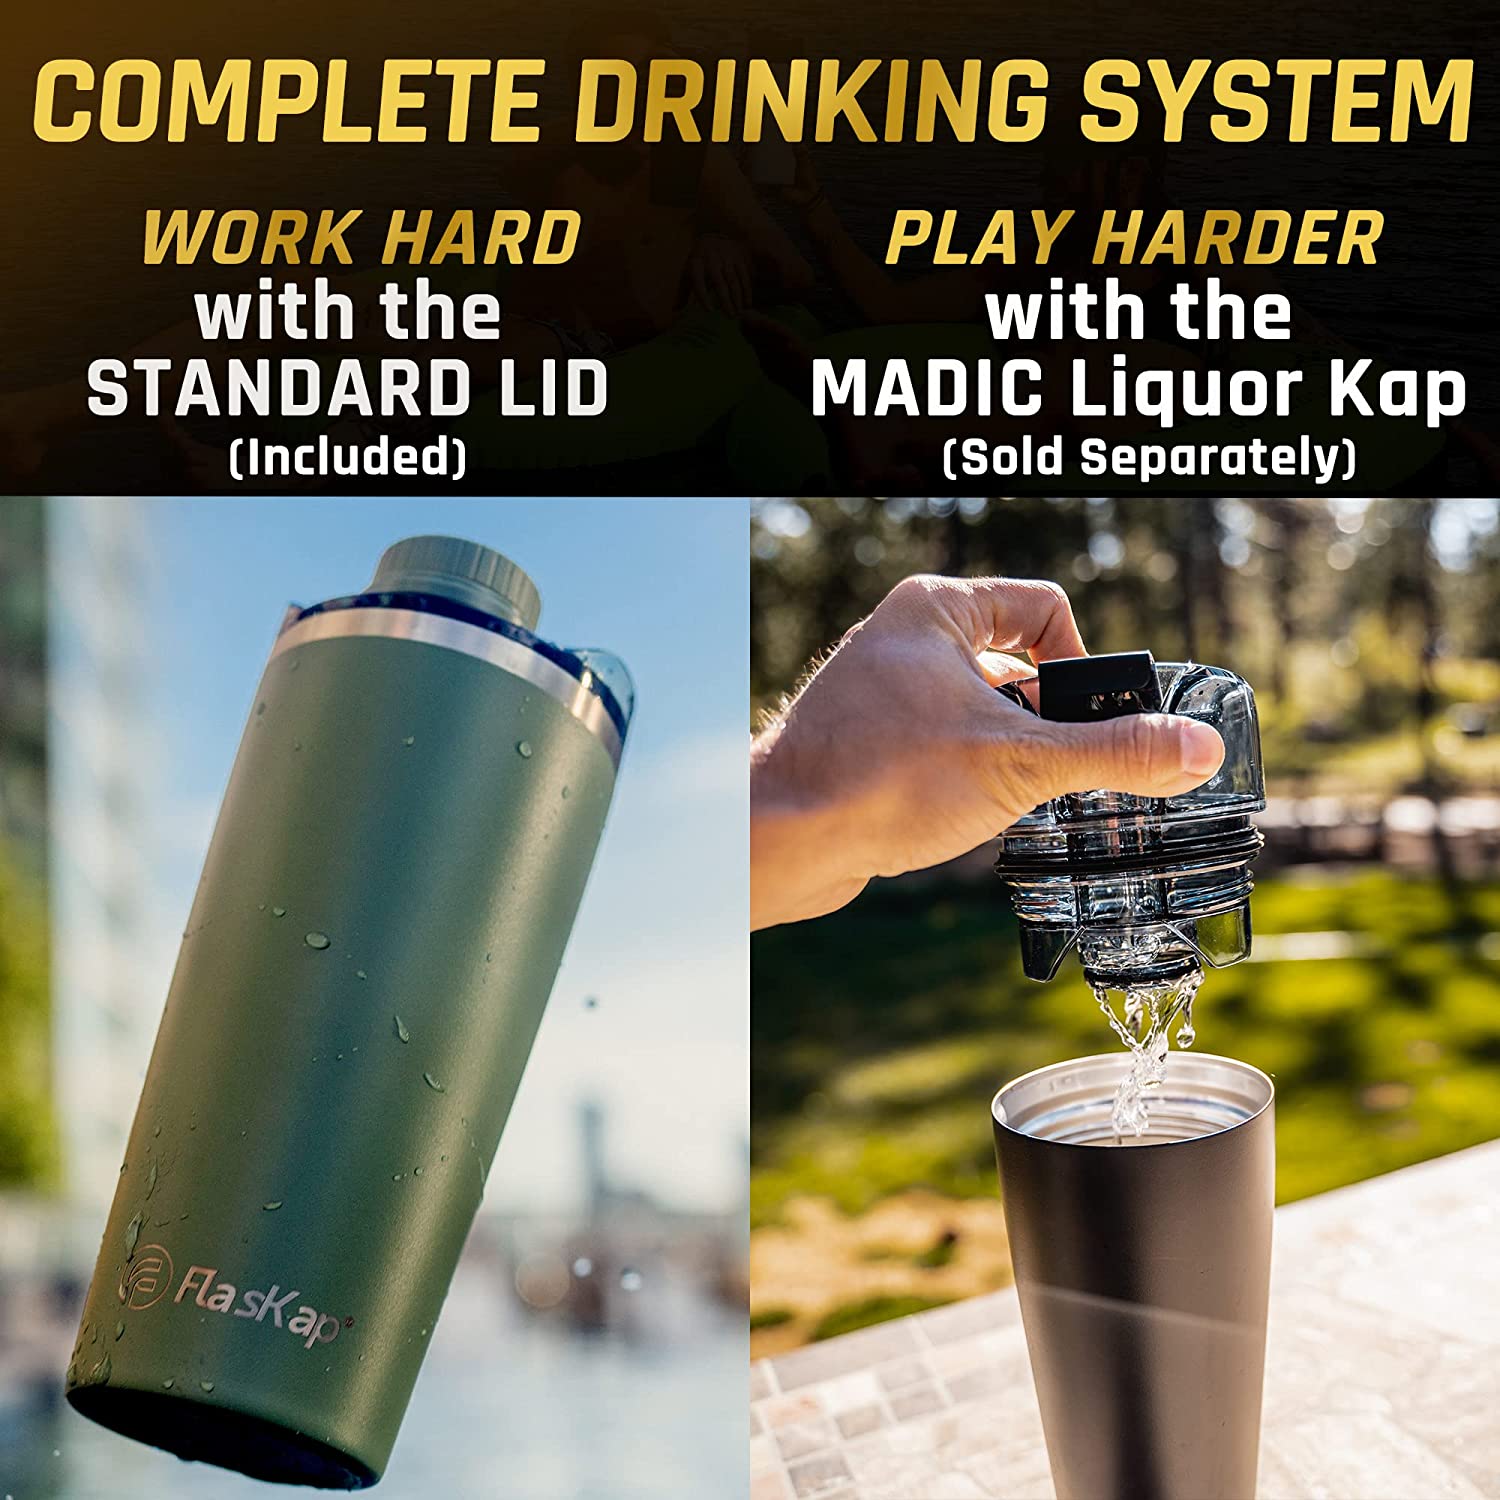 https://discounttoday.net/wp-content/uploads/2022/12/FlasKap-VOLST-22-Insulated-Tumbler-with-Standard-Lid-Double-Wall-Vacuum-Insulated-Leak-Proof-Cup-Holder-Friendly-Fits-MADIC-6-22-oz-Black112.jpg